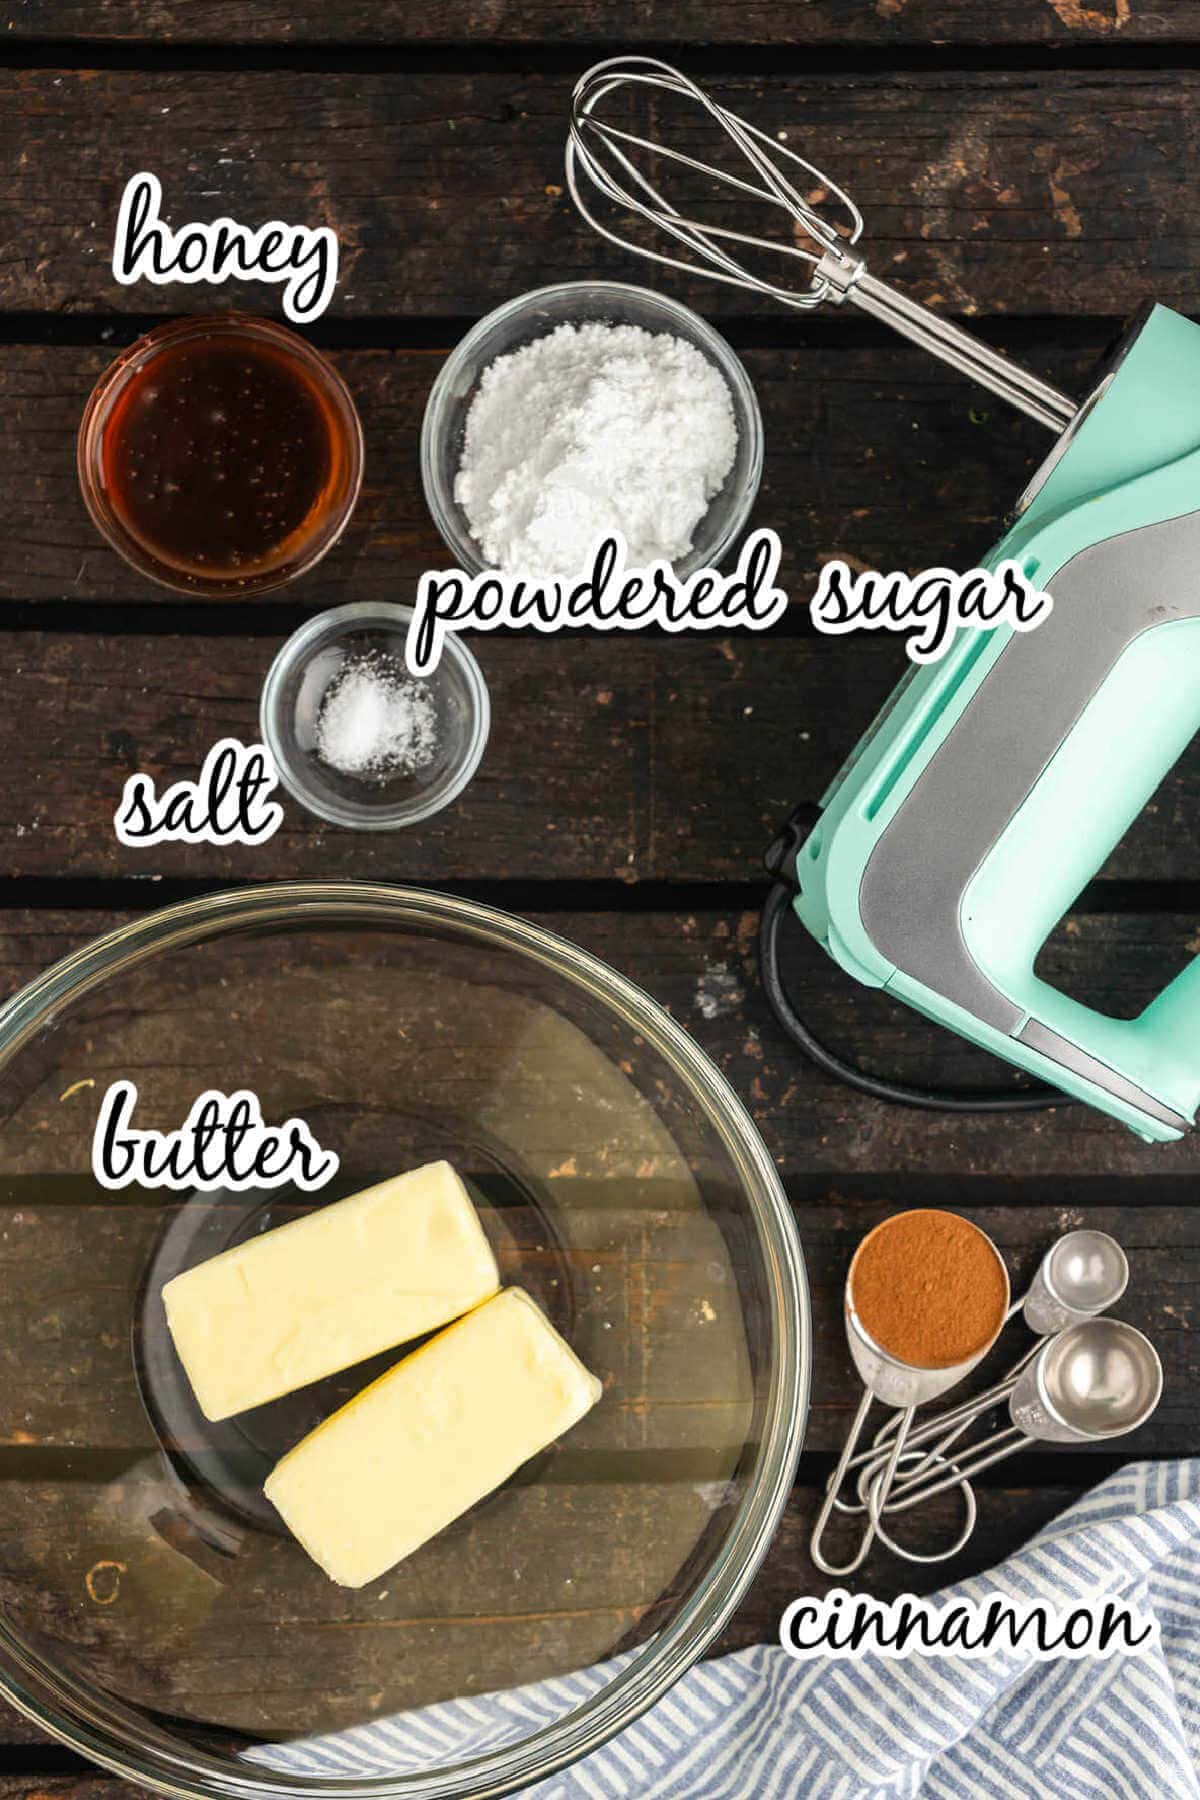 Ingredients for compound butter recipe.